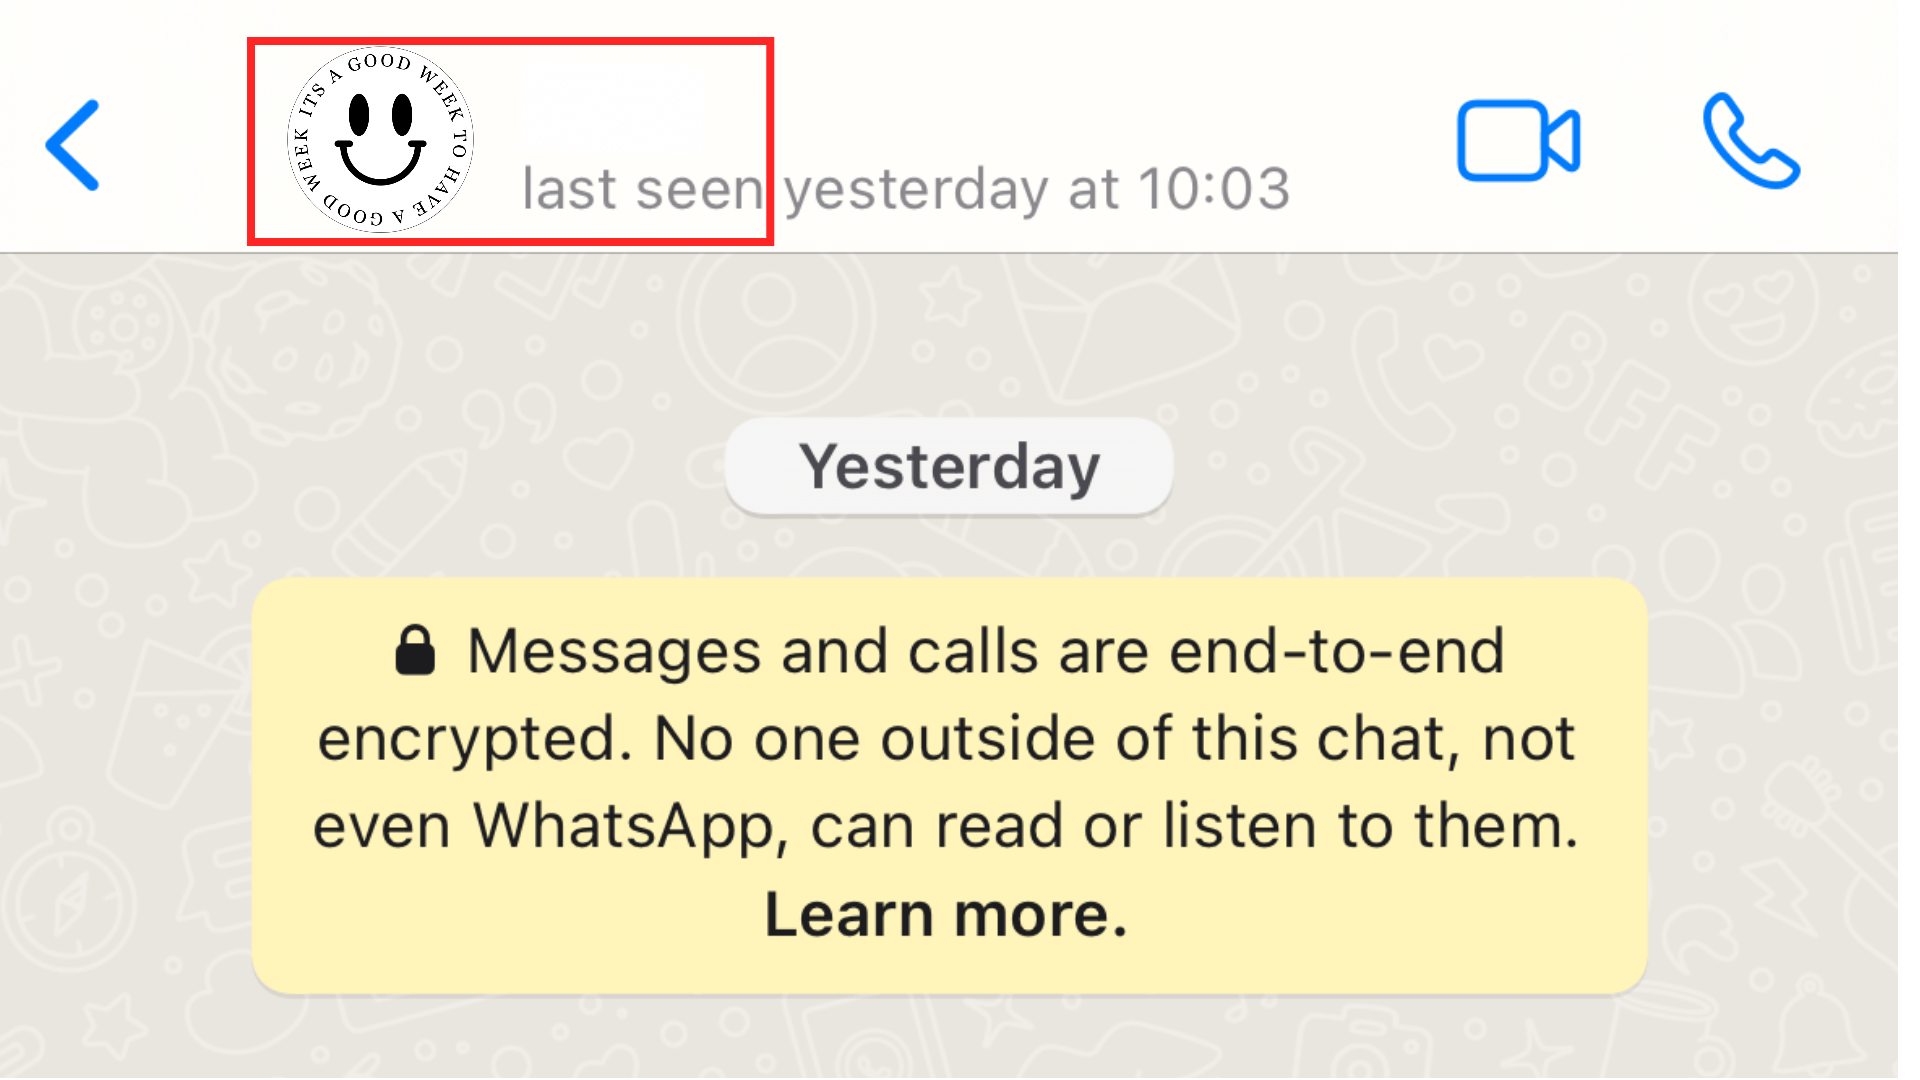 tap profile of contact you want to block on whatsapp